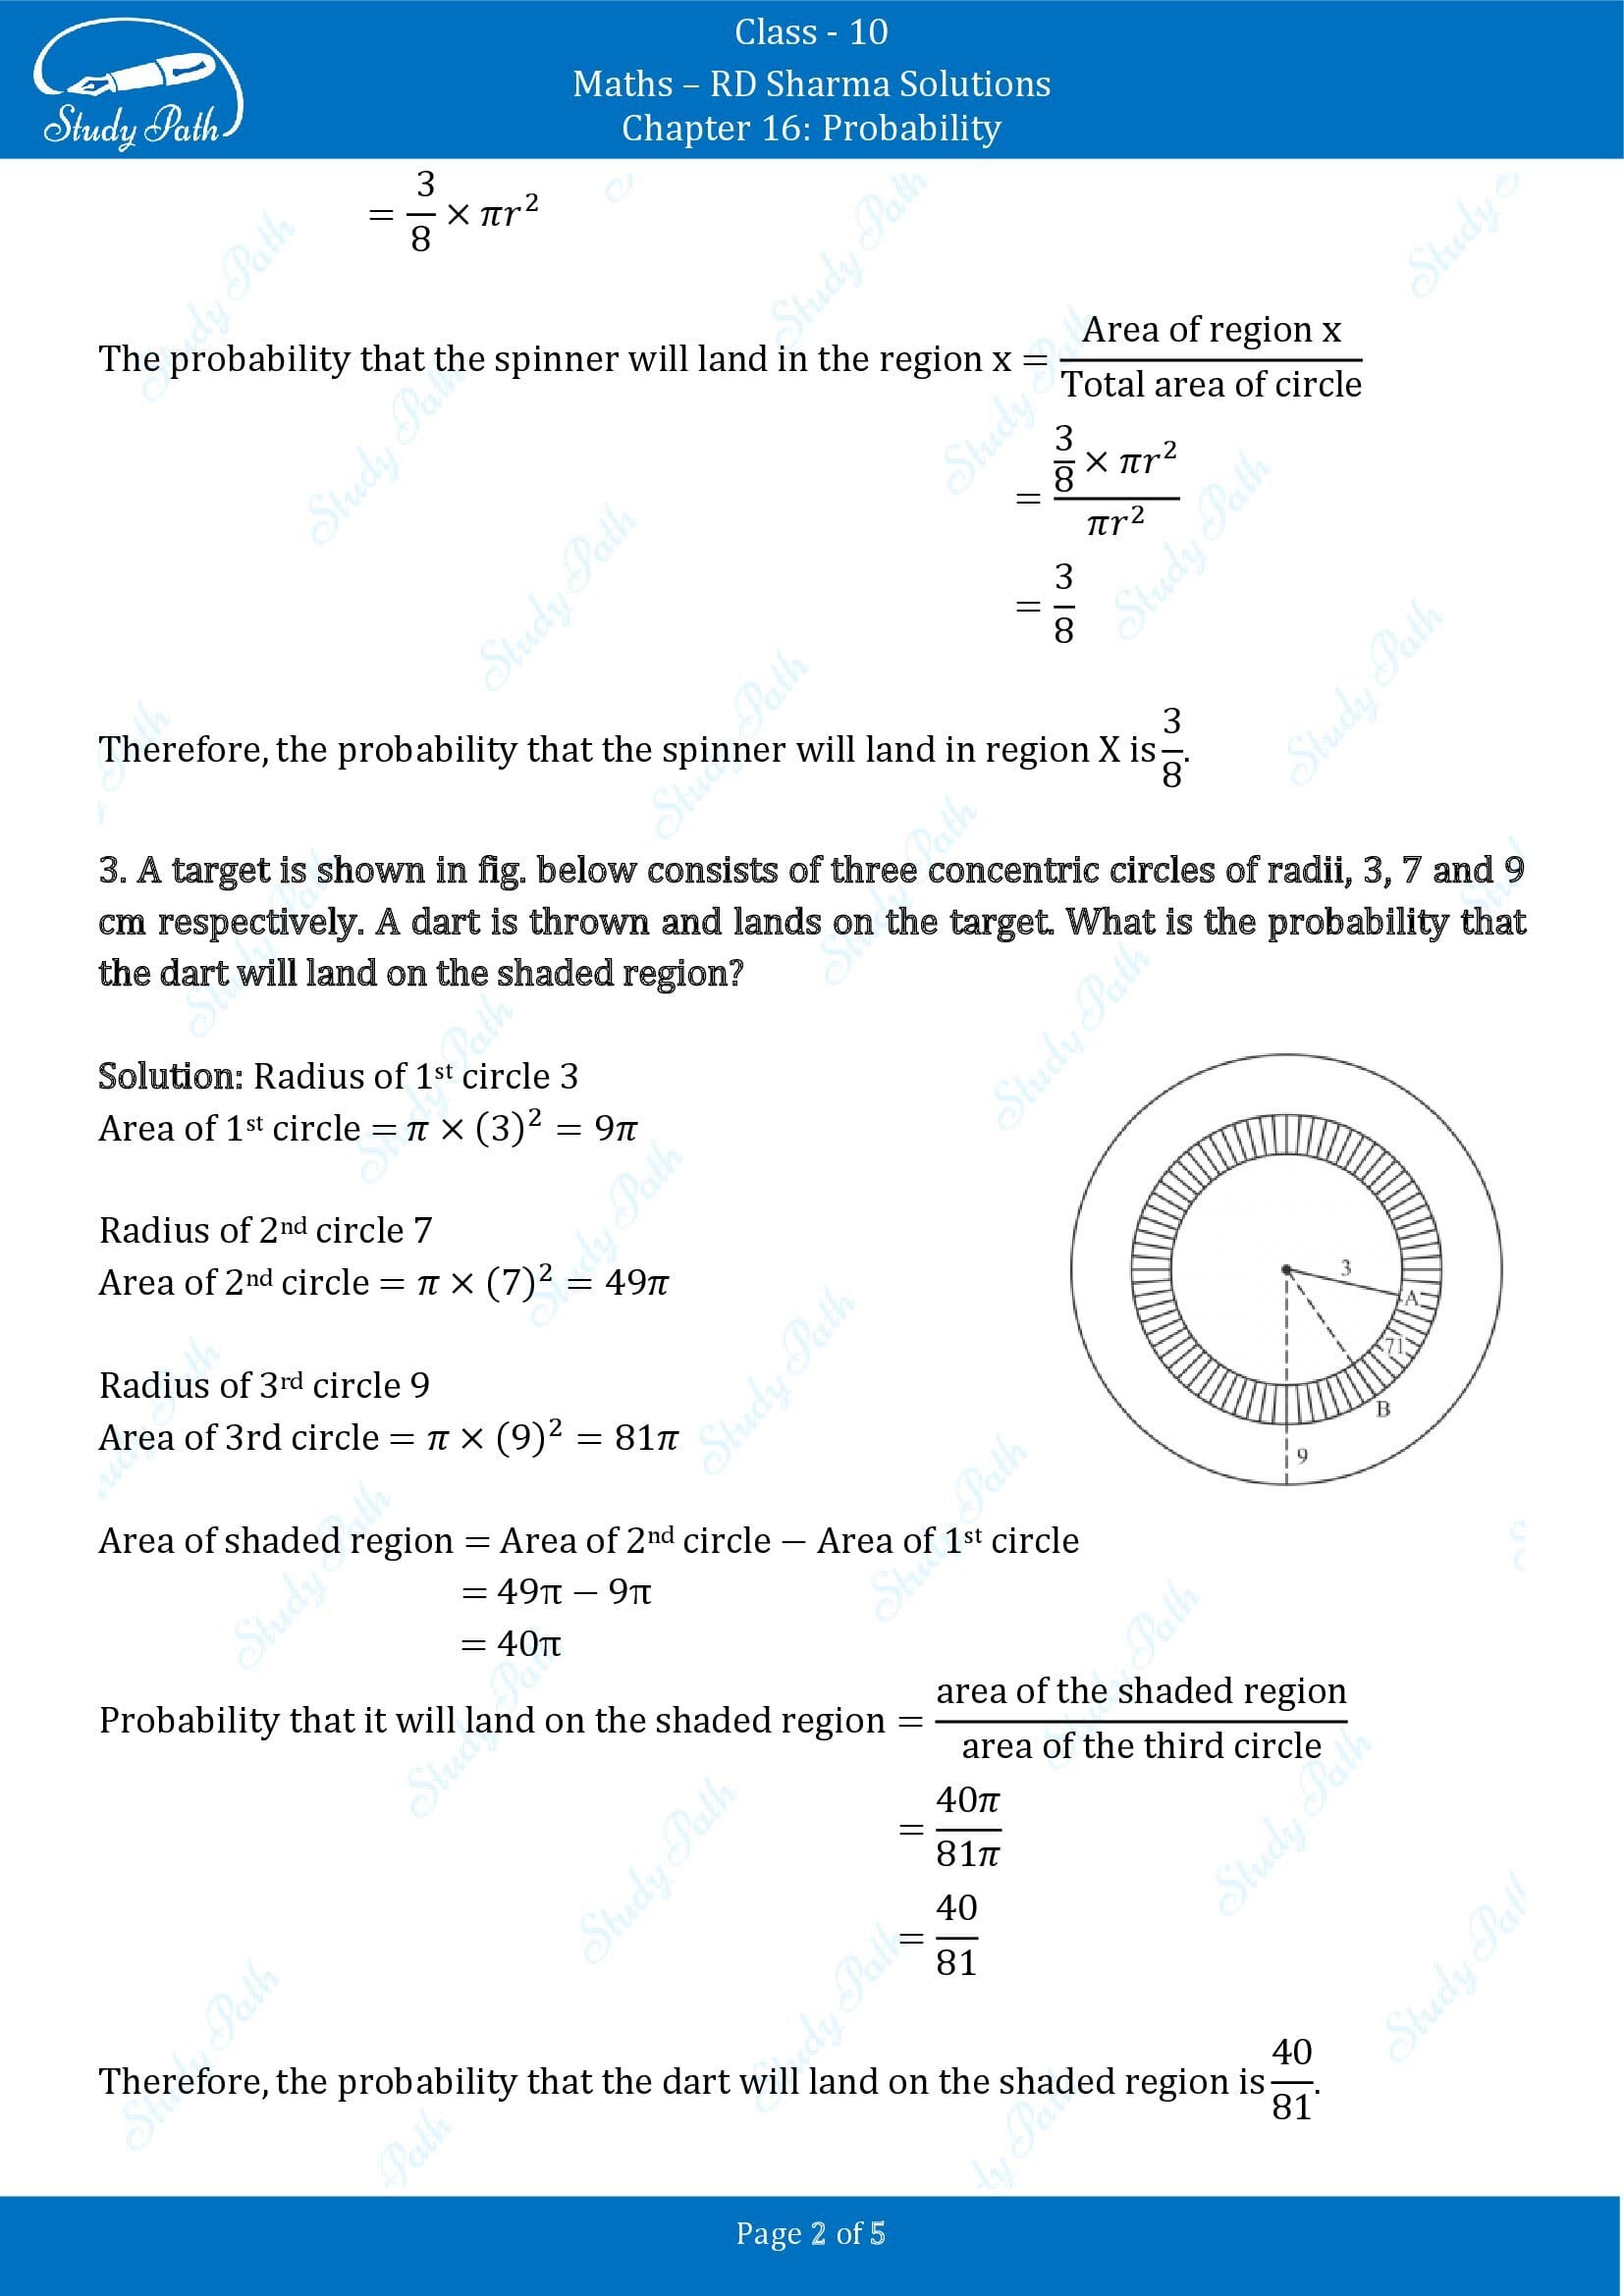 RD Sharma Solutions Class 10 Chapter 16 Probability Exercise 16.2 00002